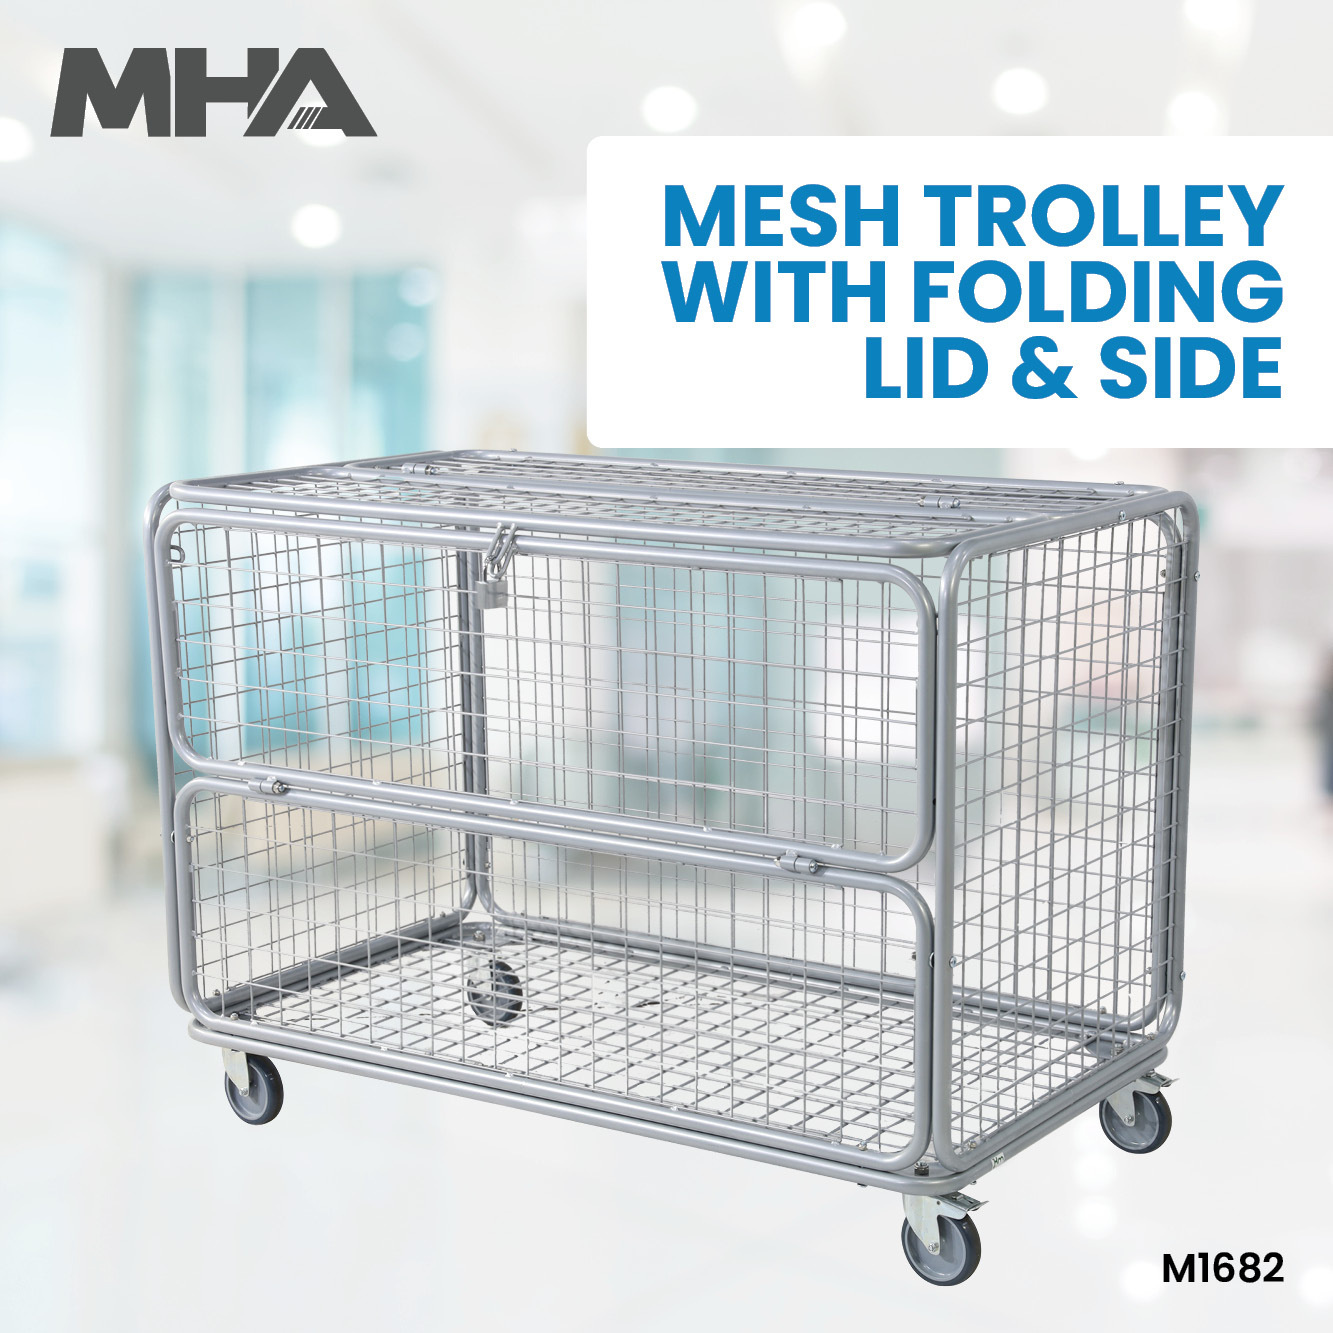 Mesh Trolley With Folding Lid & Side